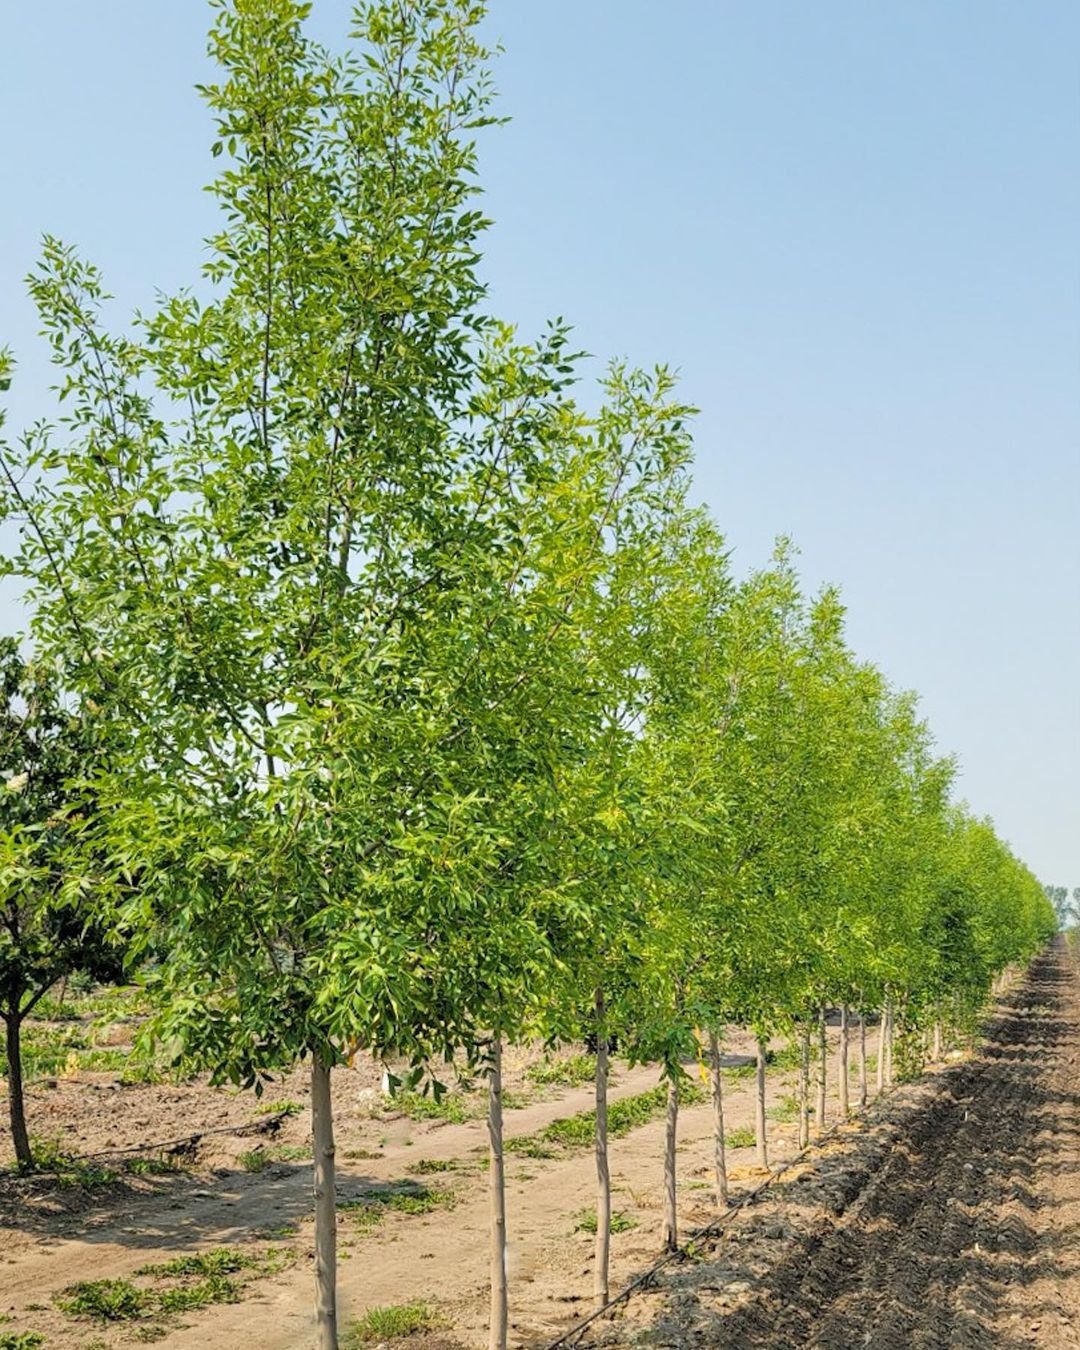 A row of Ash trees in an orchard, providing shade and bearing fruits.

